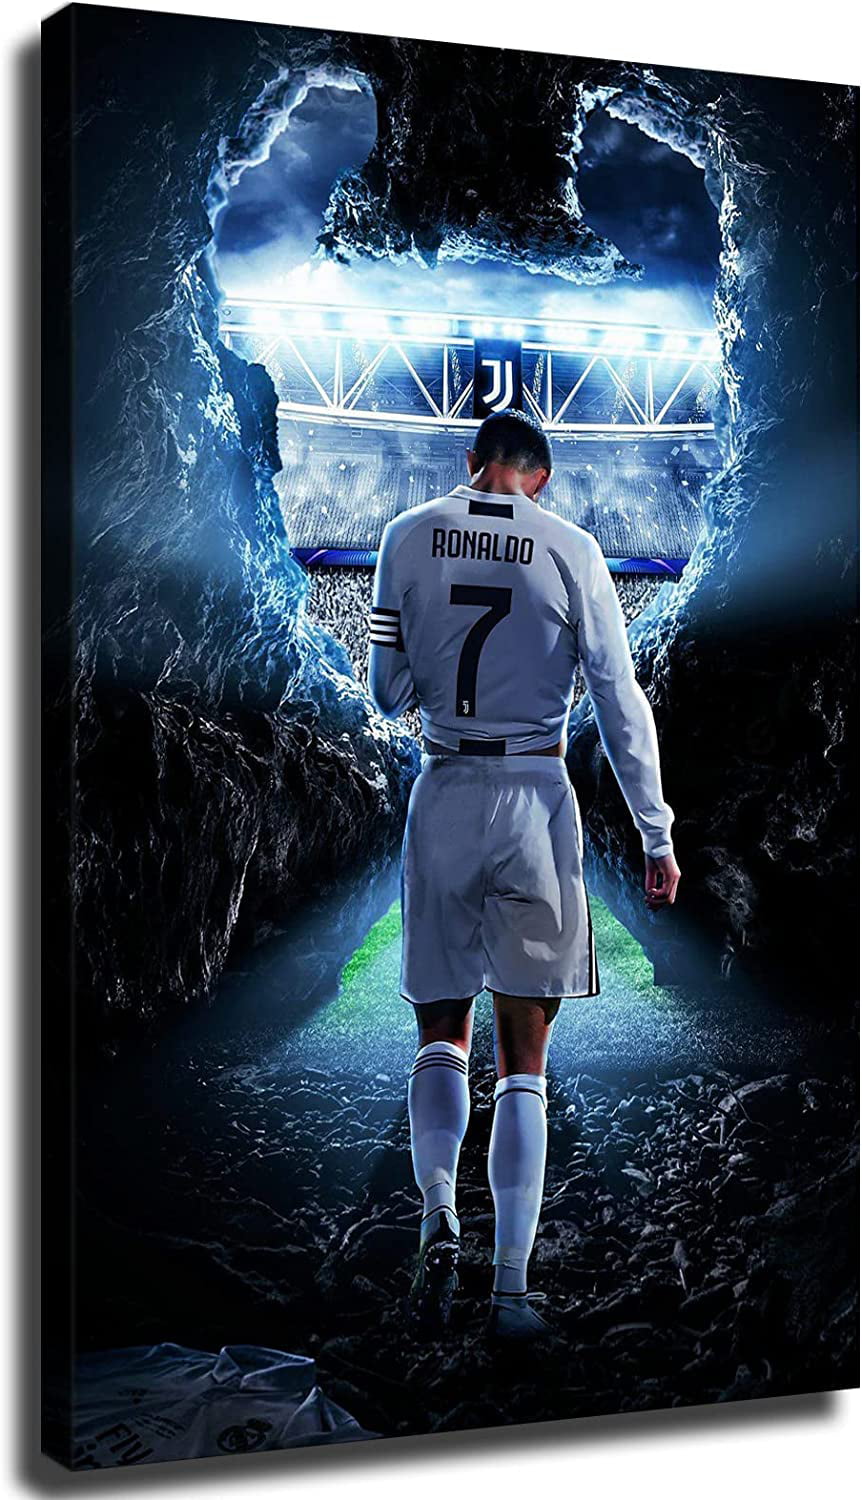 Cristiano Ronaldo Poster Football Poster Aesthetic Room Wall Decoration  Fqeoxlg Print Poster Nrtiuesx 8X12Canvas Roll,1